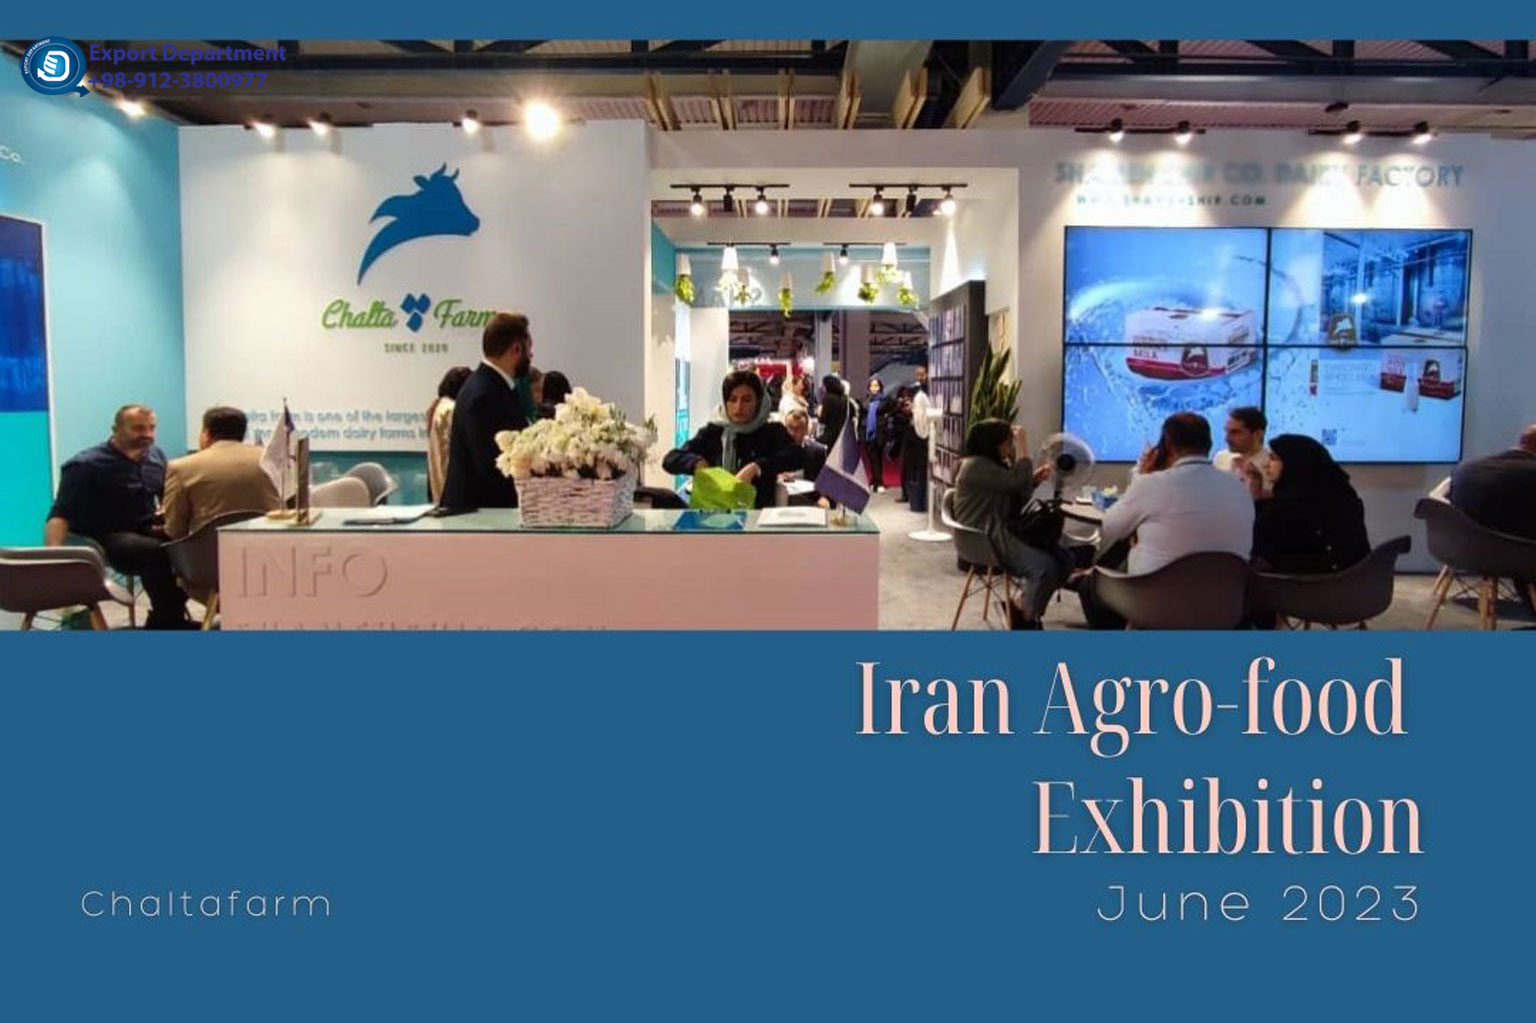 Chaltafarm Dairy and Powders: A Successful Journey at Iran Agro-food 2023 Exhibition